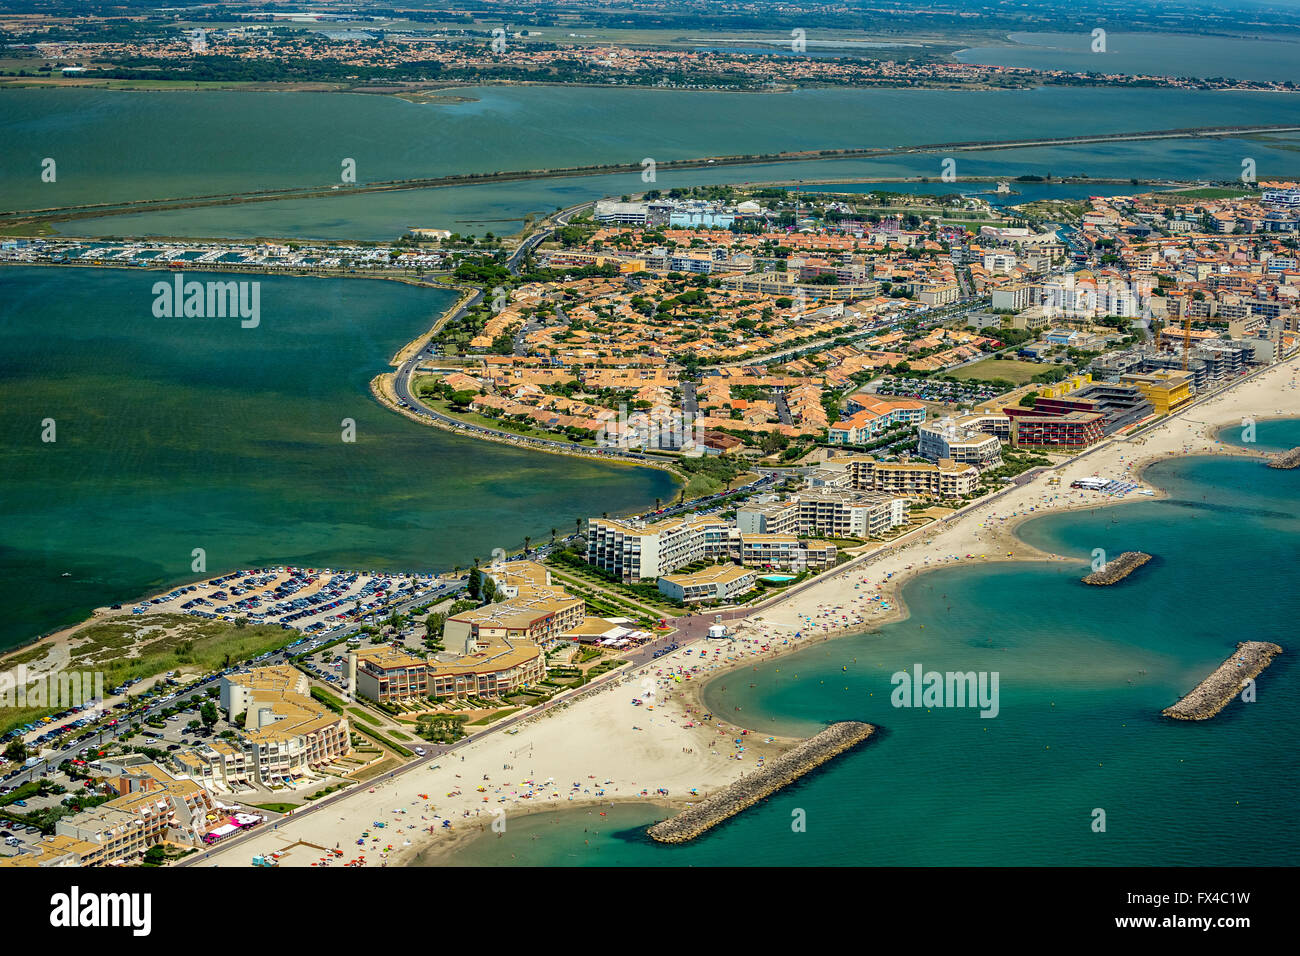 Aerial view, beach, Mediterranean and vacation resorts, Palavas-les-Flots, France, Languedoc-Roussillon, France, Europe, Stock Photo